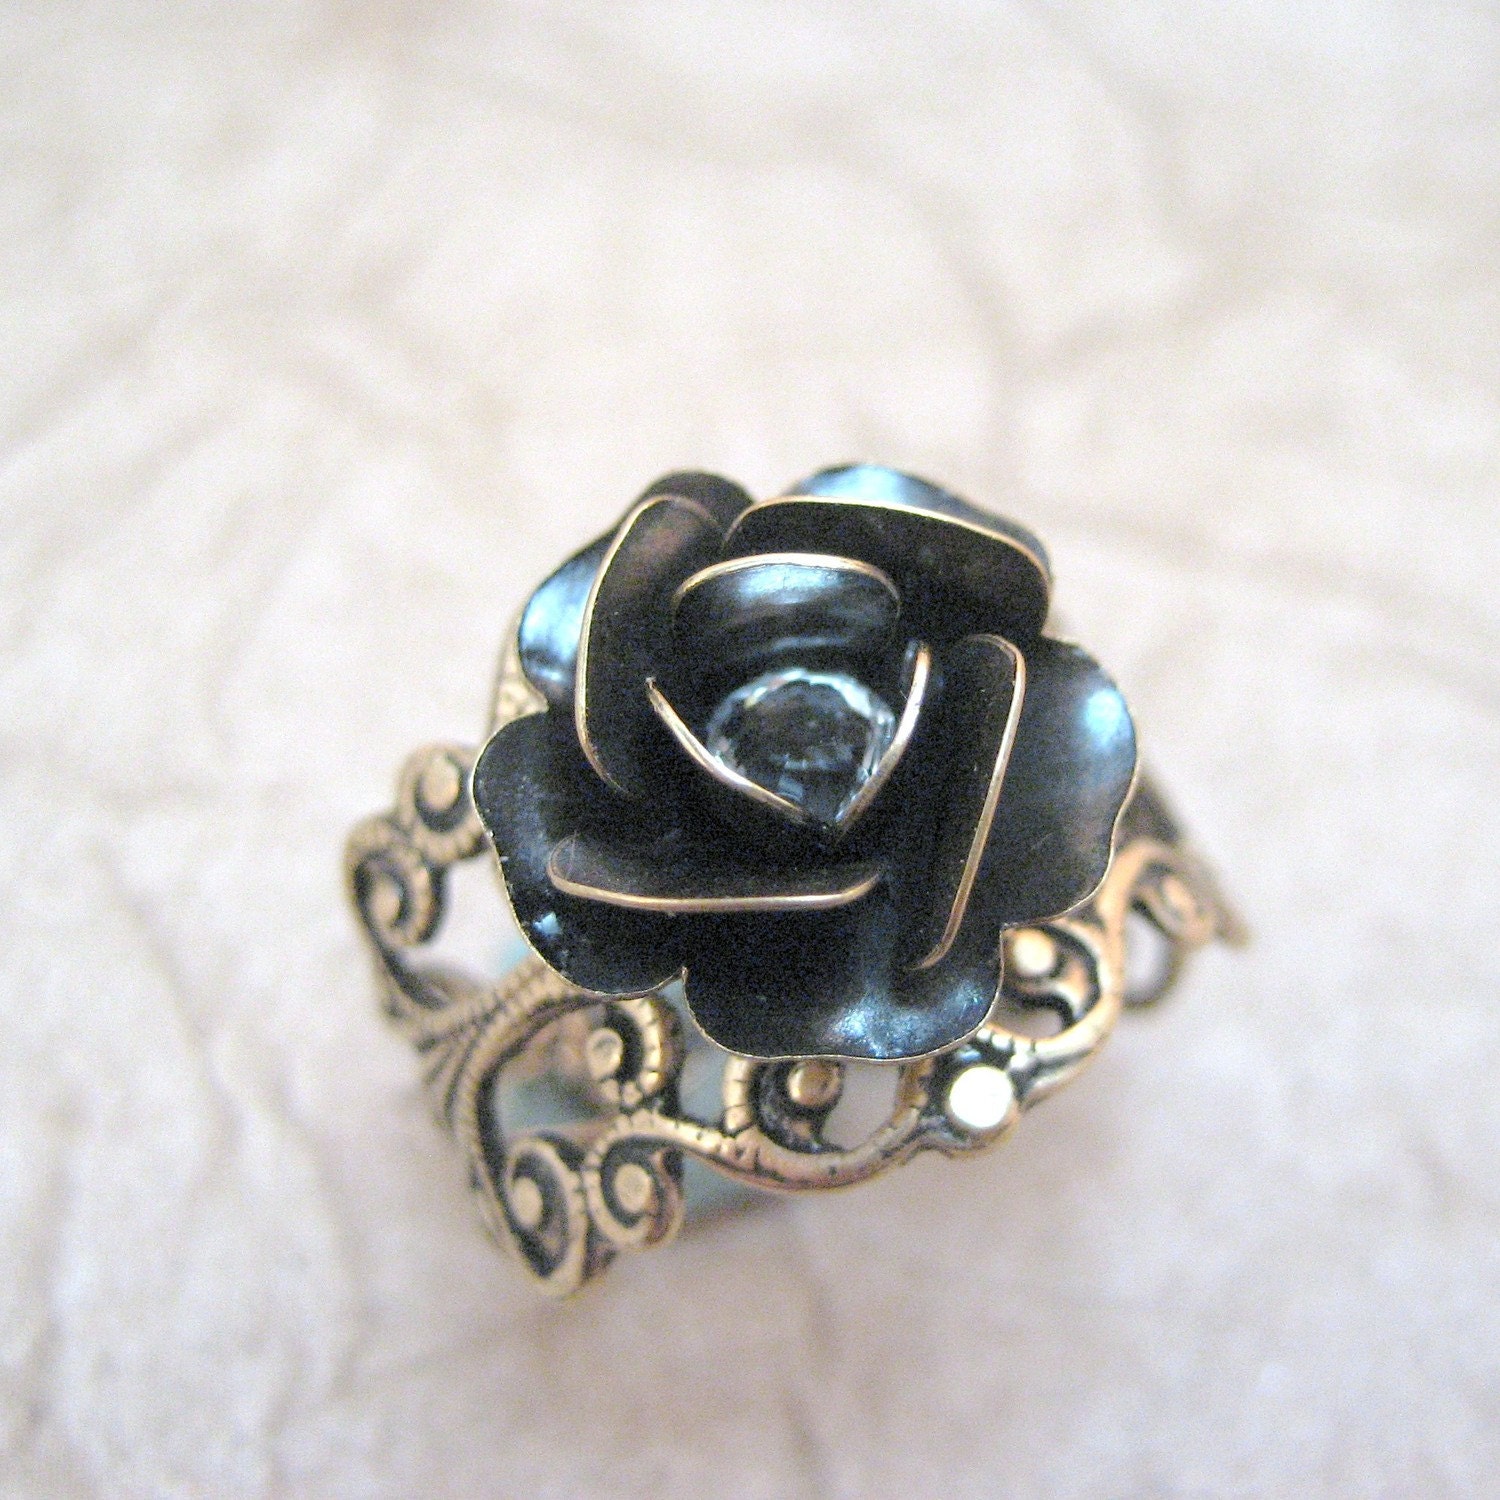 Steampunk Rose Ring - Neo Victorian Gold Tone Filigree Jewelry - Handmade and Designed by A Second Time